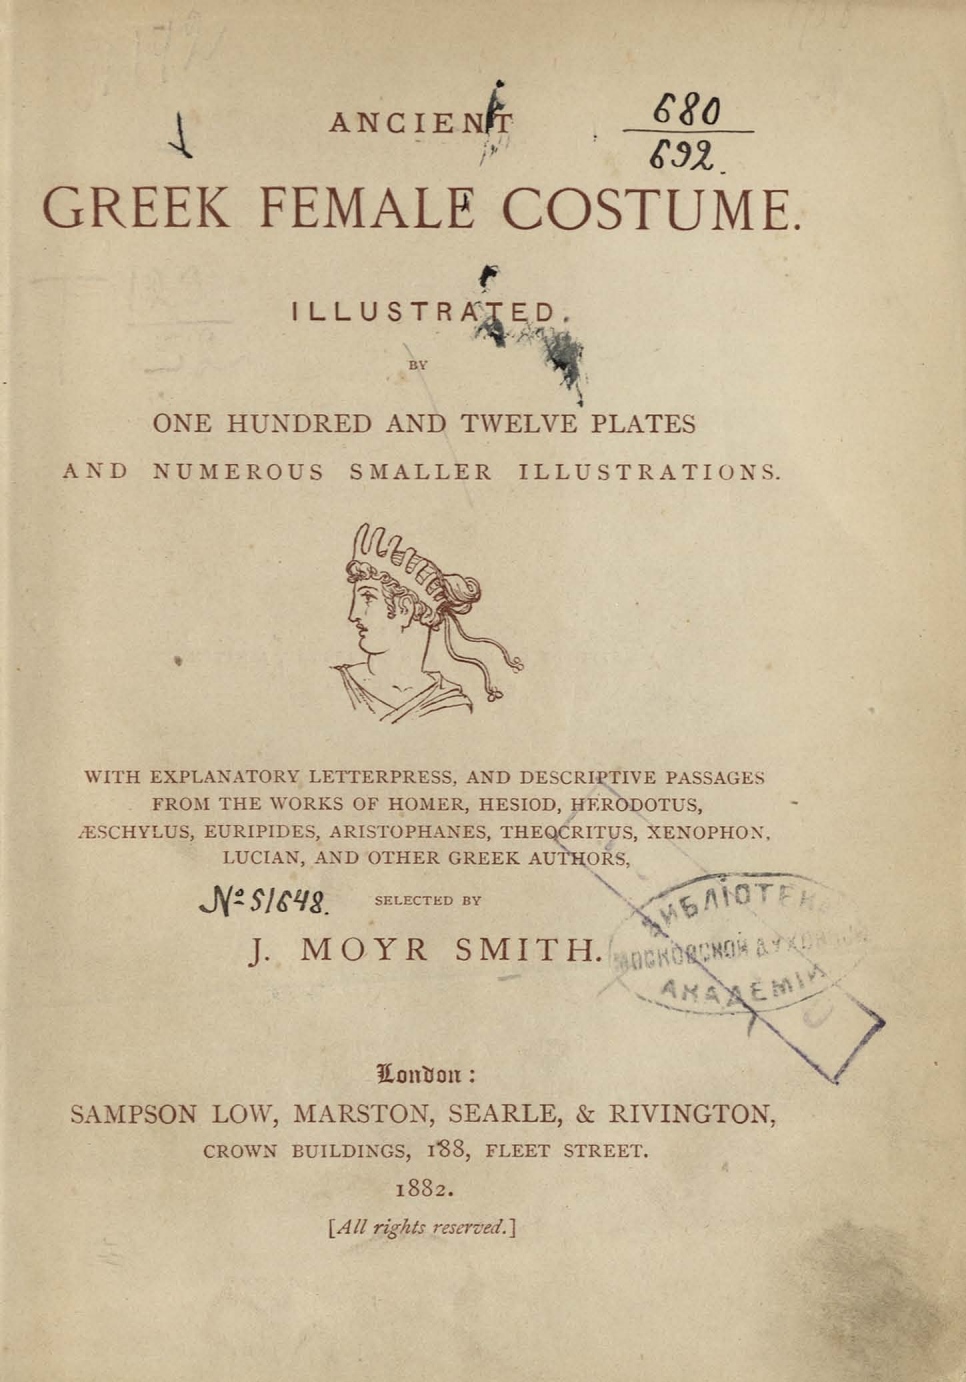 Ancient greek female costume : Illustrated by one hundred and twelve plates and numerous smaller illustrations : With explanatory letterpress, and descriptive passages from the works of Homer, Hesiod, Herodotus, Æschylus, Euripides, Aristophanes, Theocritus, Xenophon, Lucian, and other greek authors, / selected by J. Moyr Smith. — London : Sampson Low, Marston, Searle & Rivington, 1882